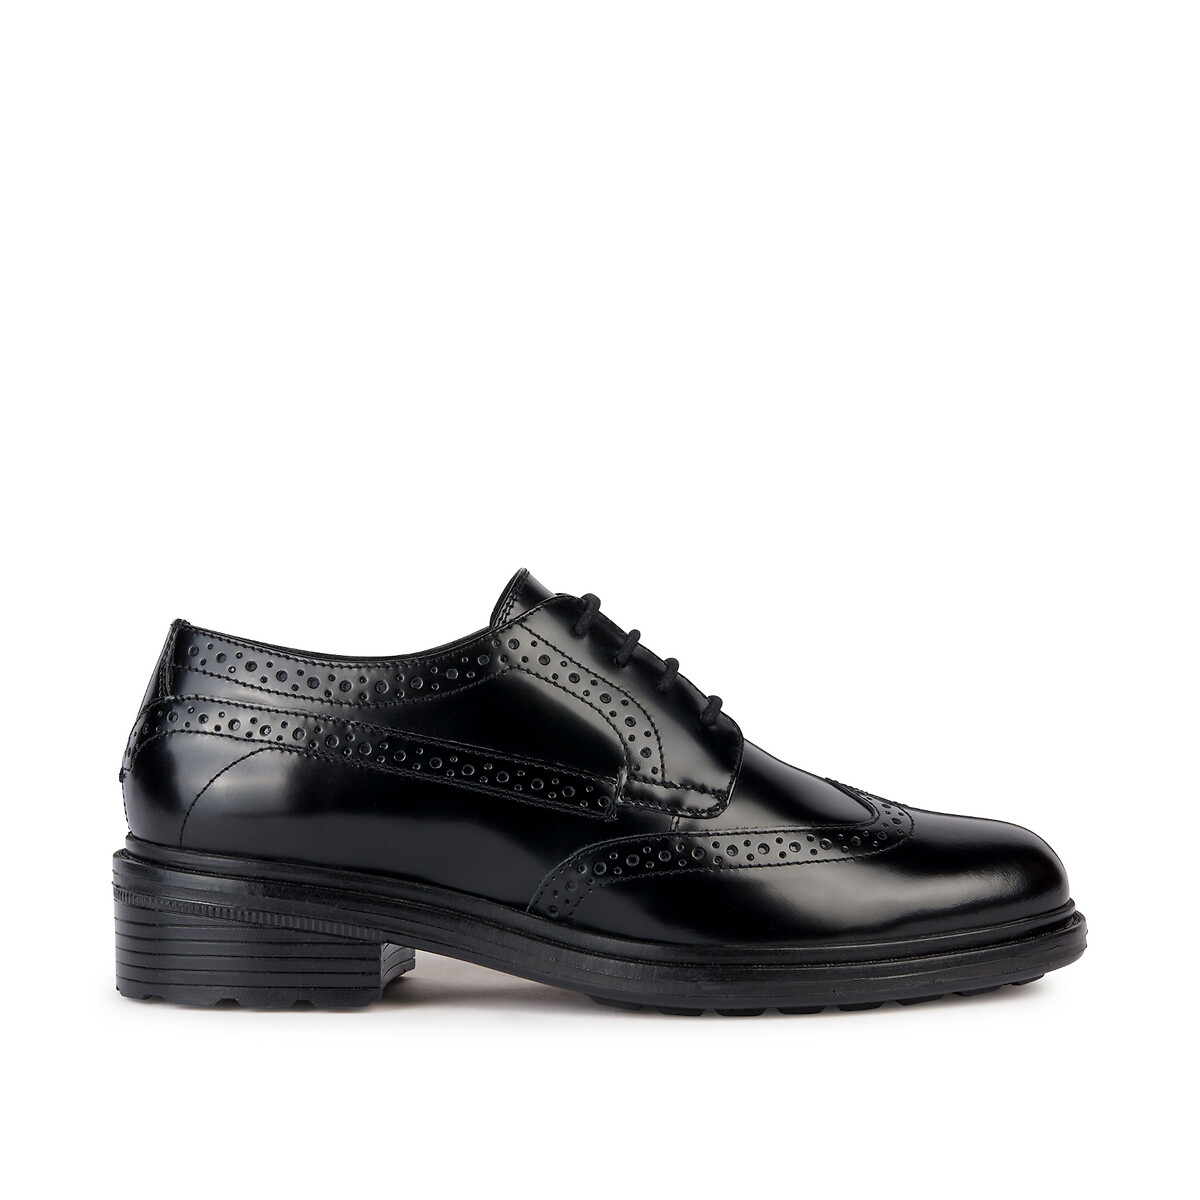 Walk Pleasure Breathable Brogues in Leather